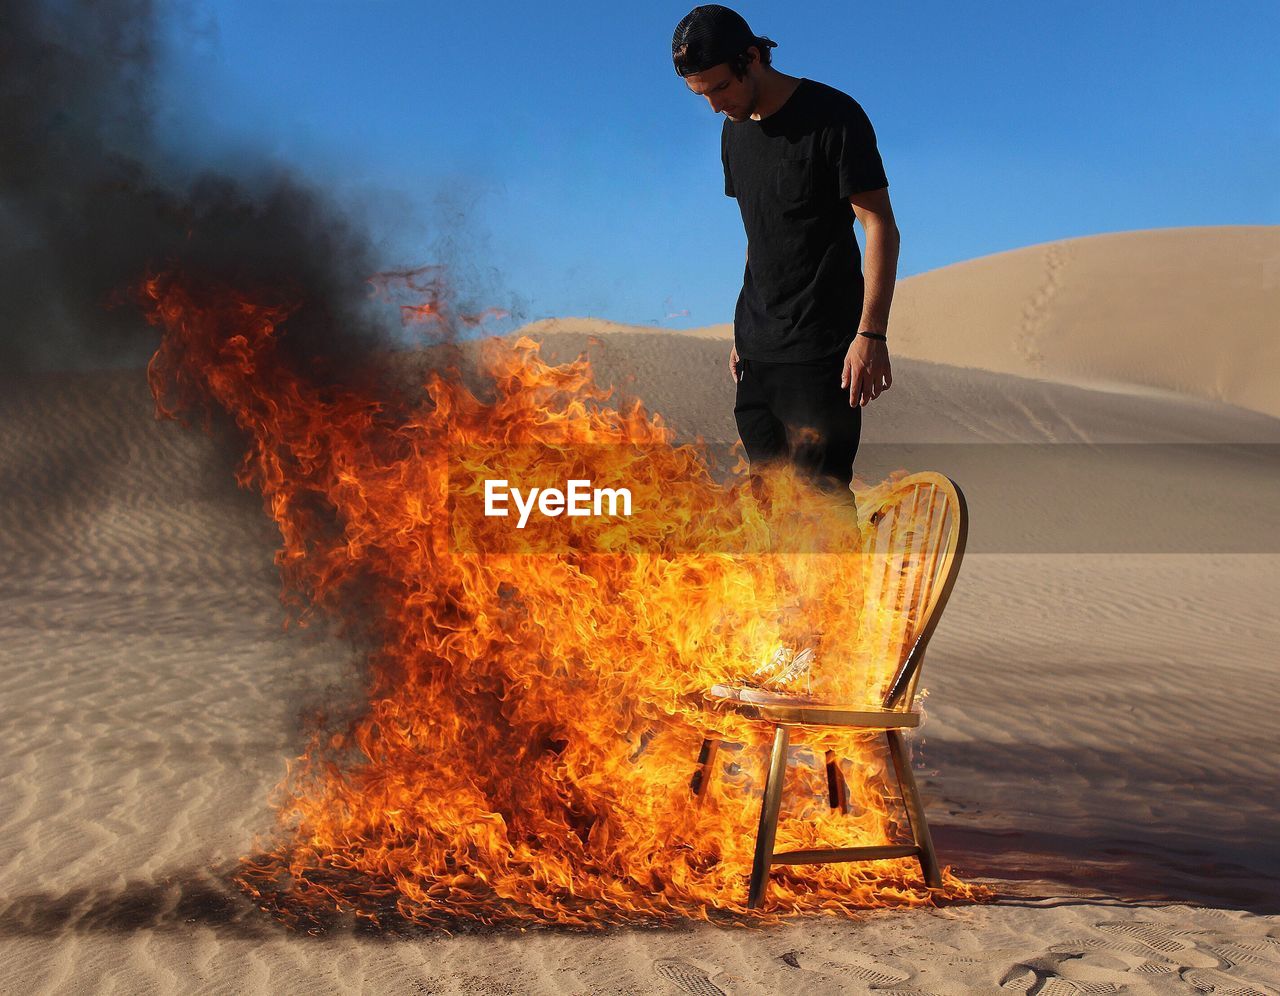 Young man standing on burning chair at desert